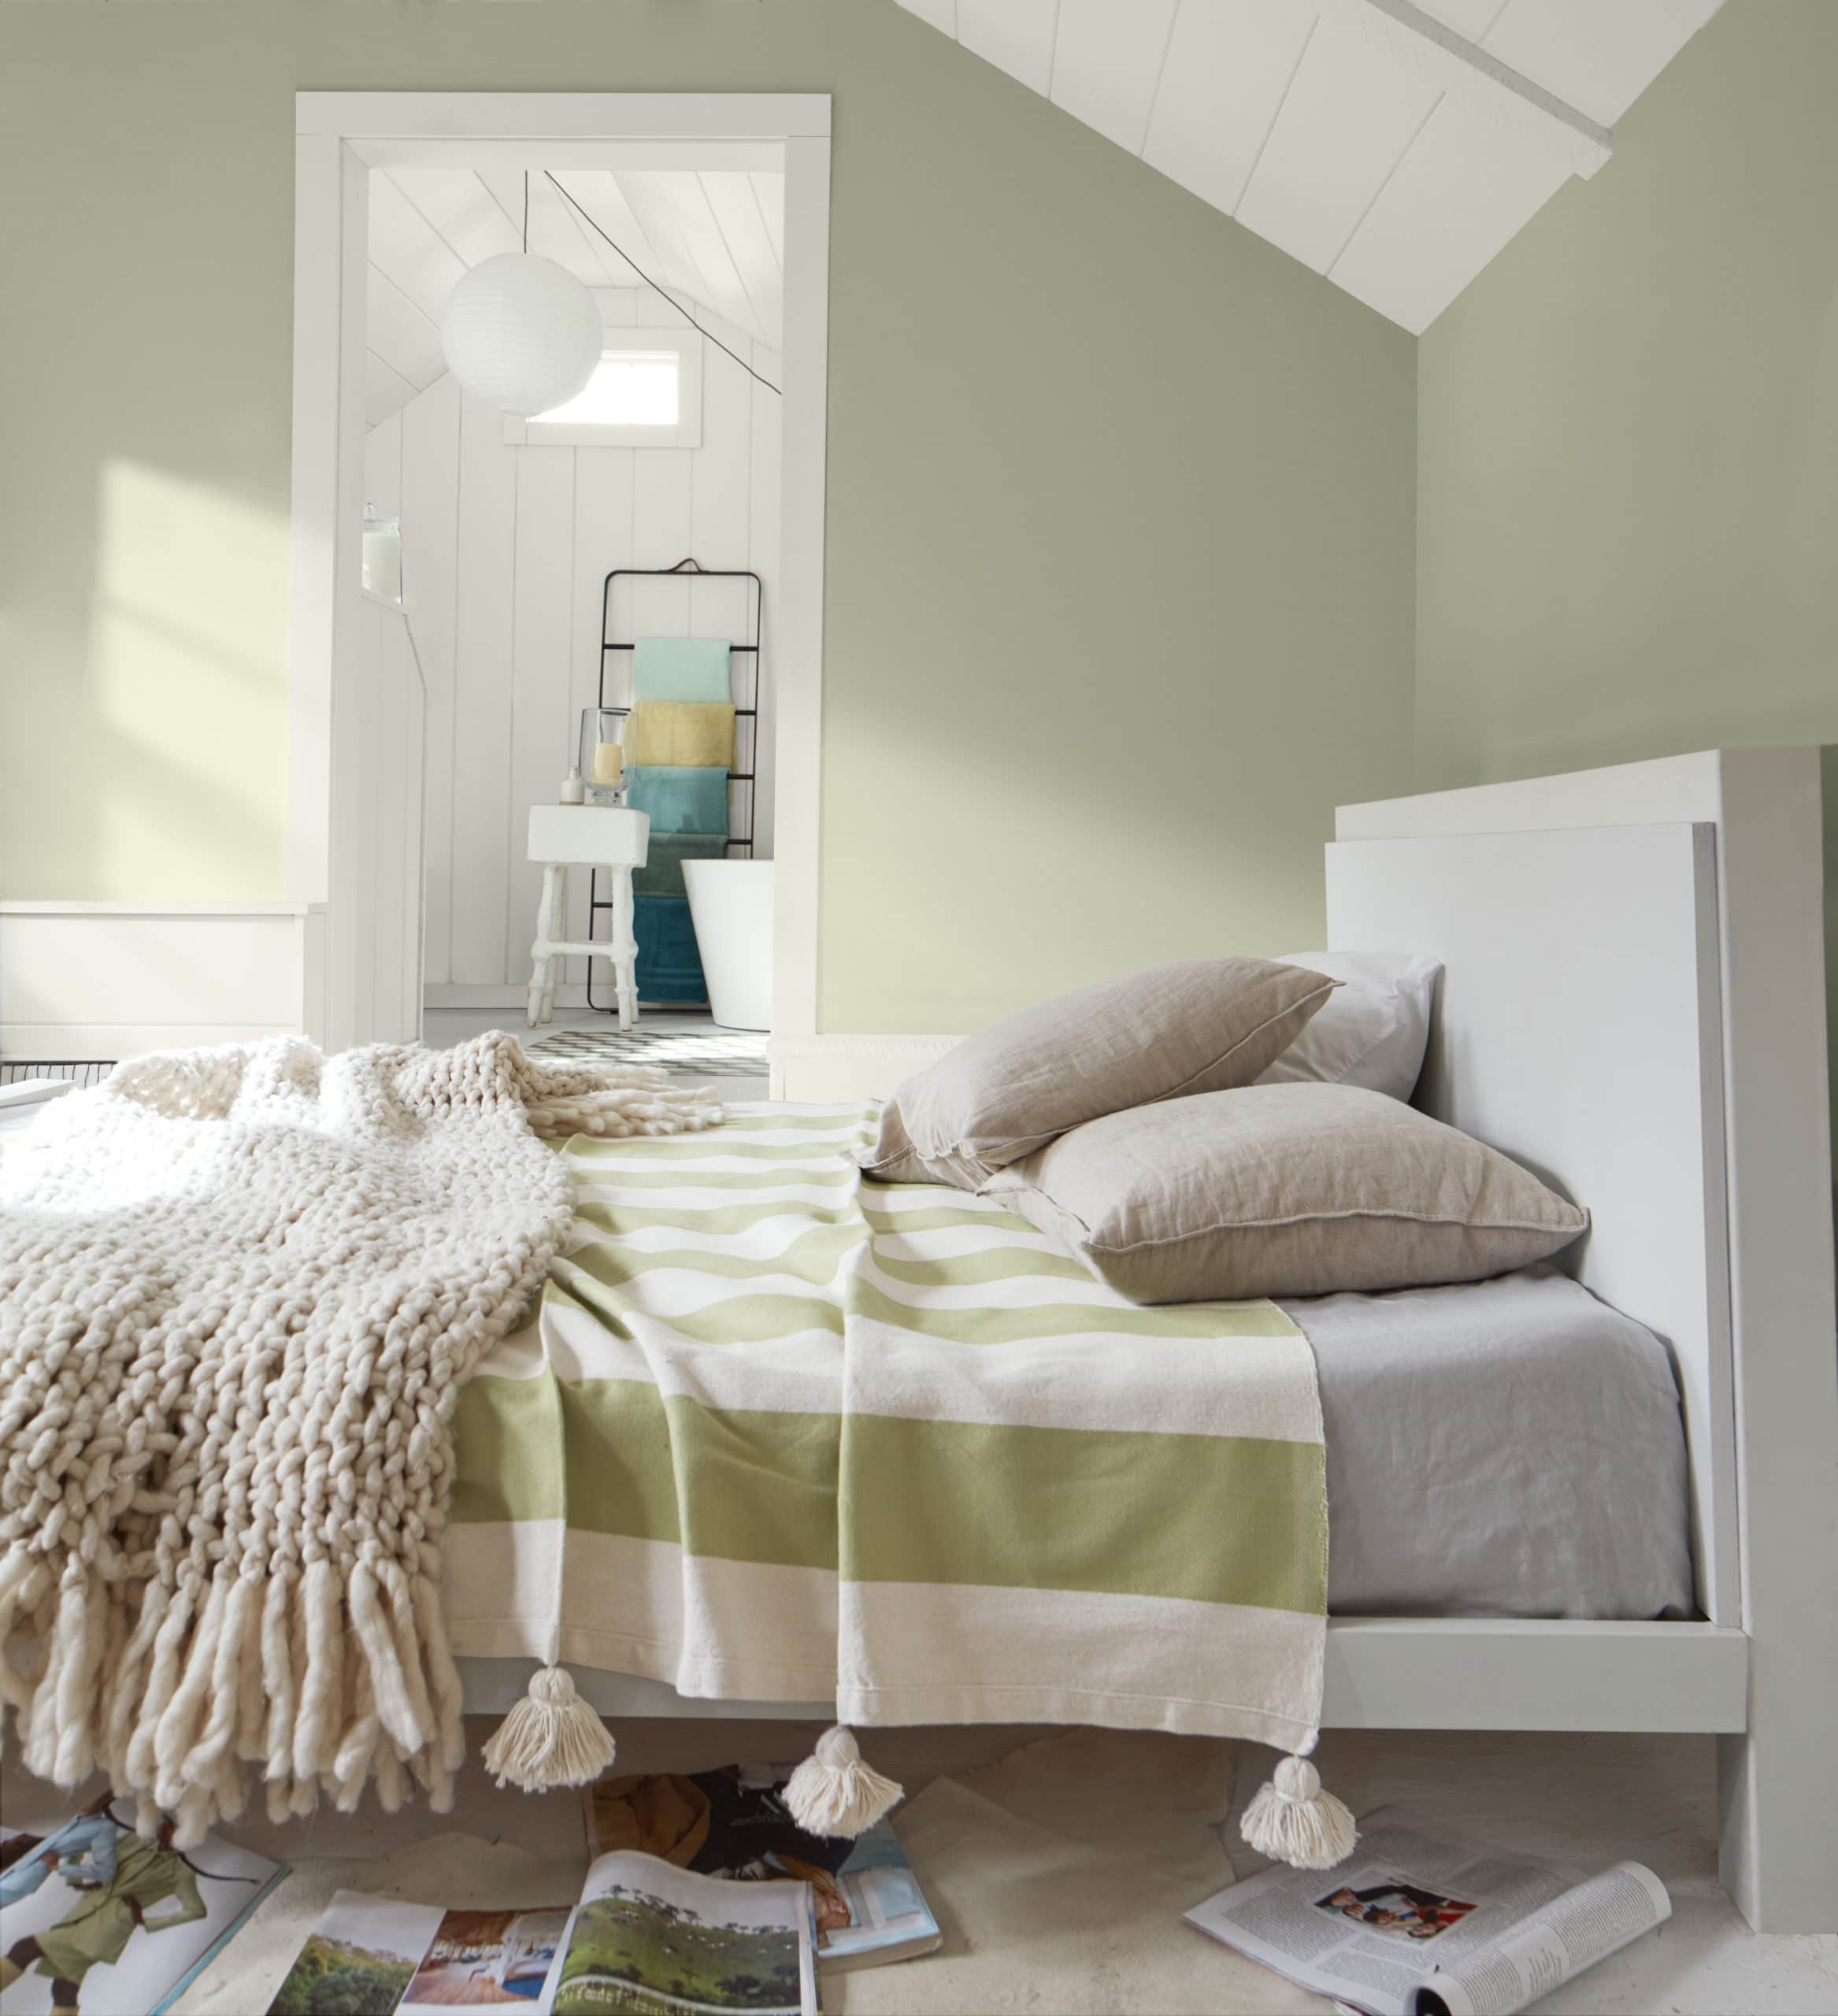 Benjamin Moore October Mist walls with white bed and green and white striped bedding.